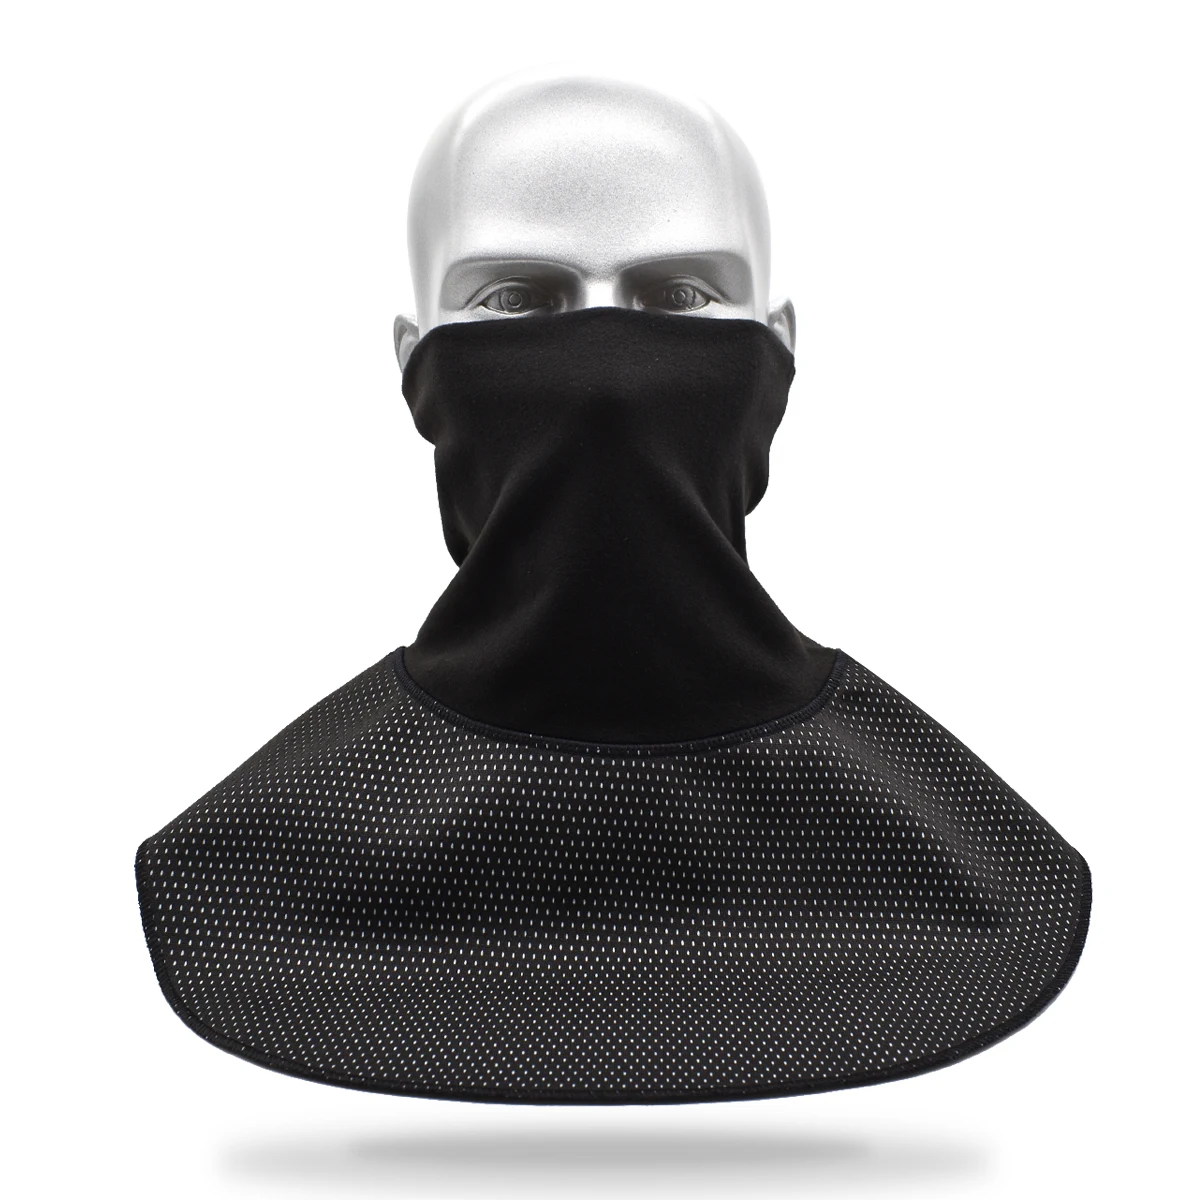 

WOSAWE Winter Balaclava Racing Motorcycle Face Mask Neck Cover Chest Wind Stopper Windproof Waterproof Cycling Ski Shield